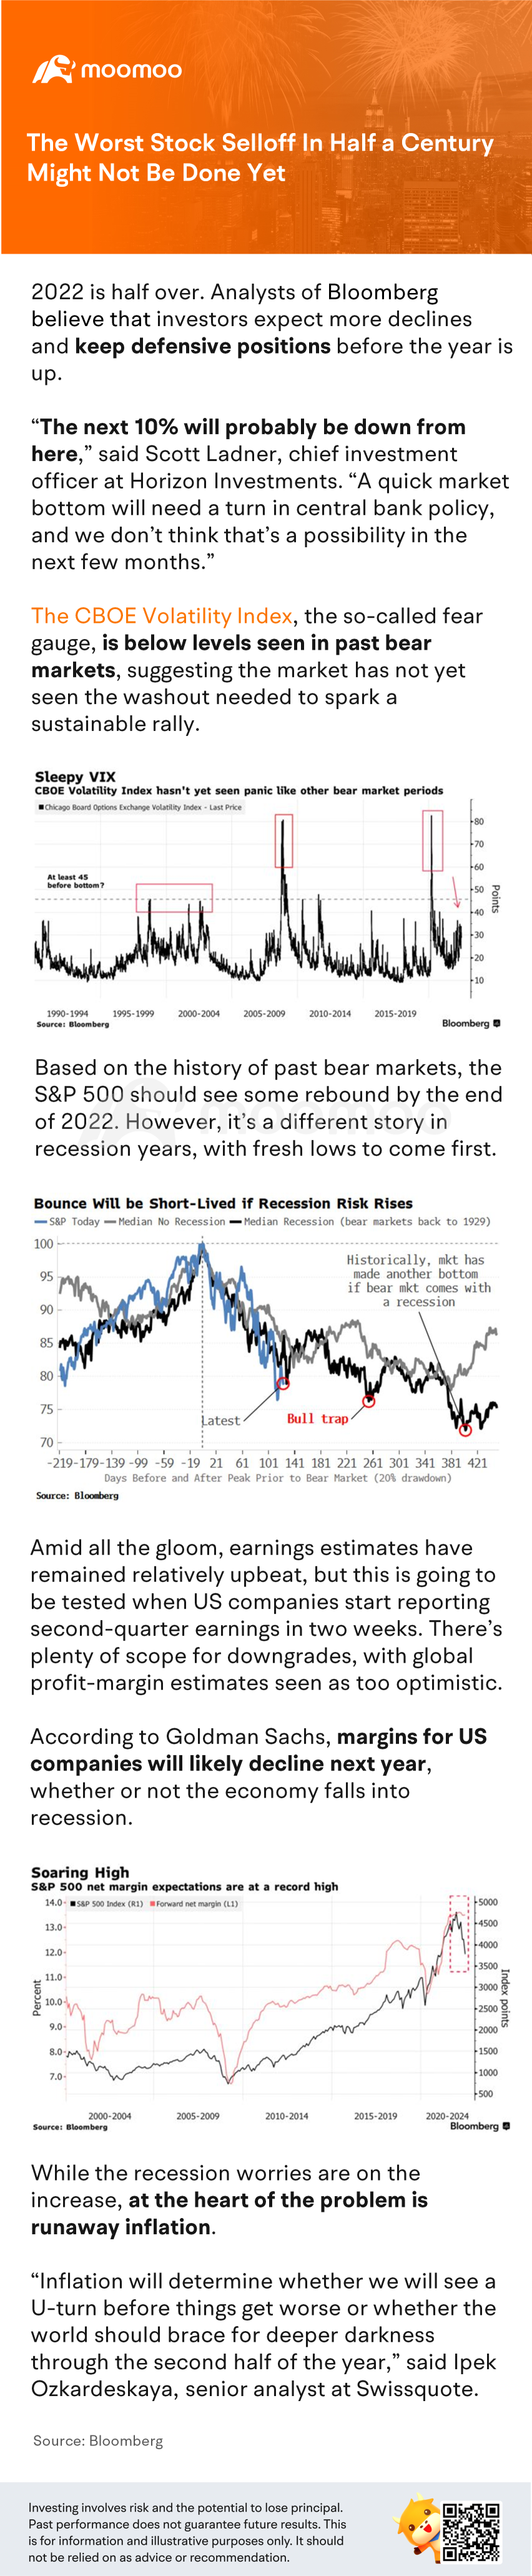 The worst stock selloff in half a century might not be done yet